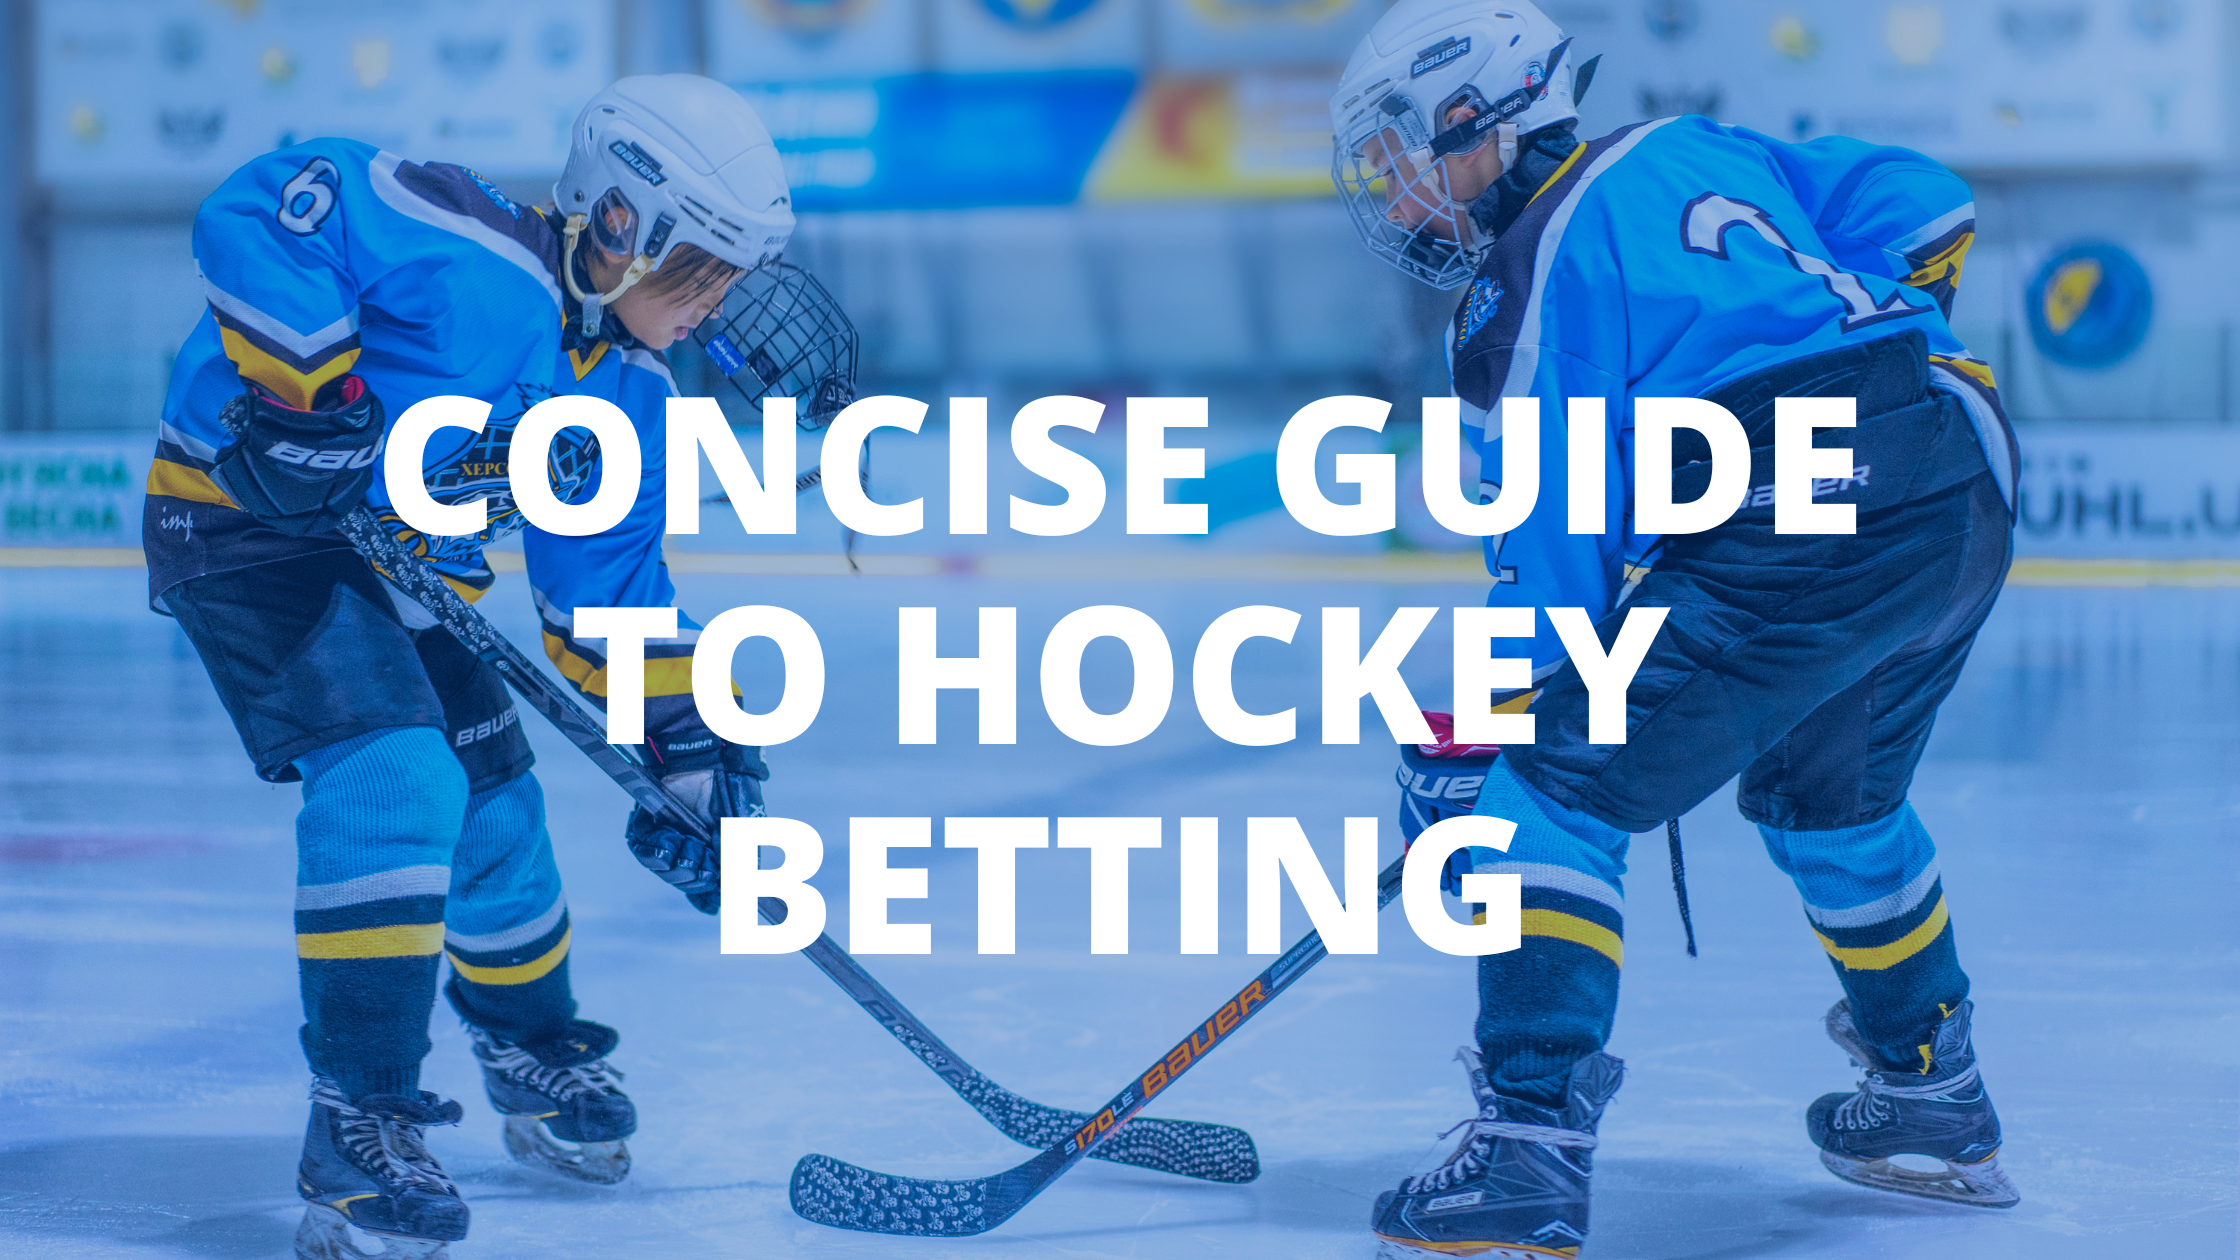 Concise Guide To Hockey Betting